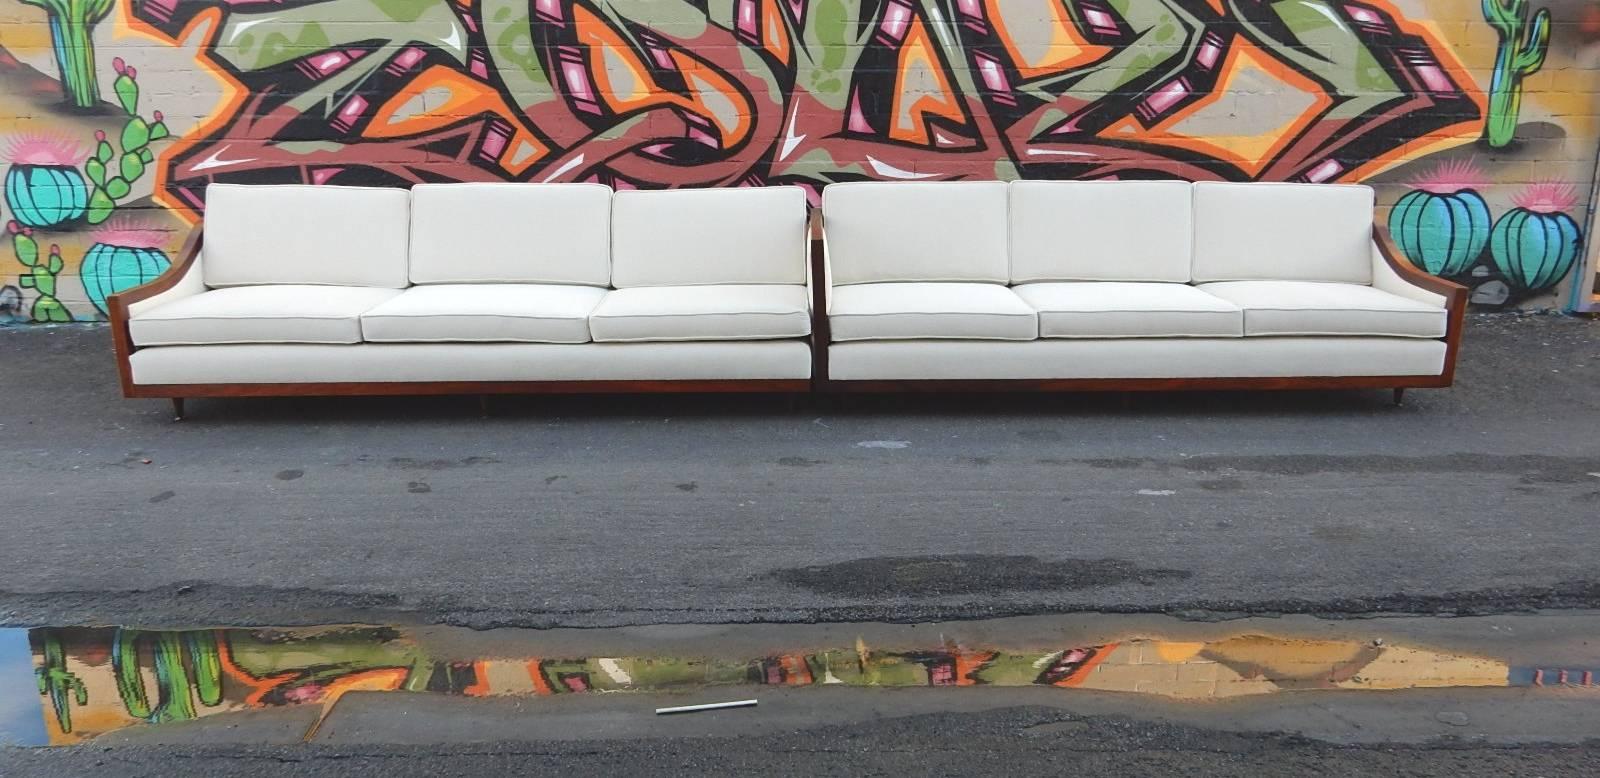 Fabulous newly upholstered(plus new premium foam)1960s sofa section with epic lines.
Two 7+ foot sections, one without inside arm.
Trimmed in walnut, front, sides and back. Ten tapered legs.
Can be arranged in an 